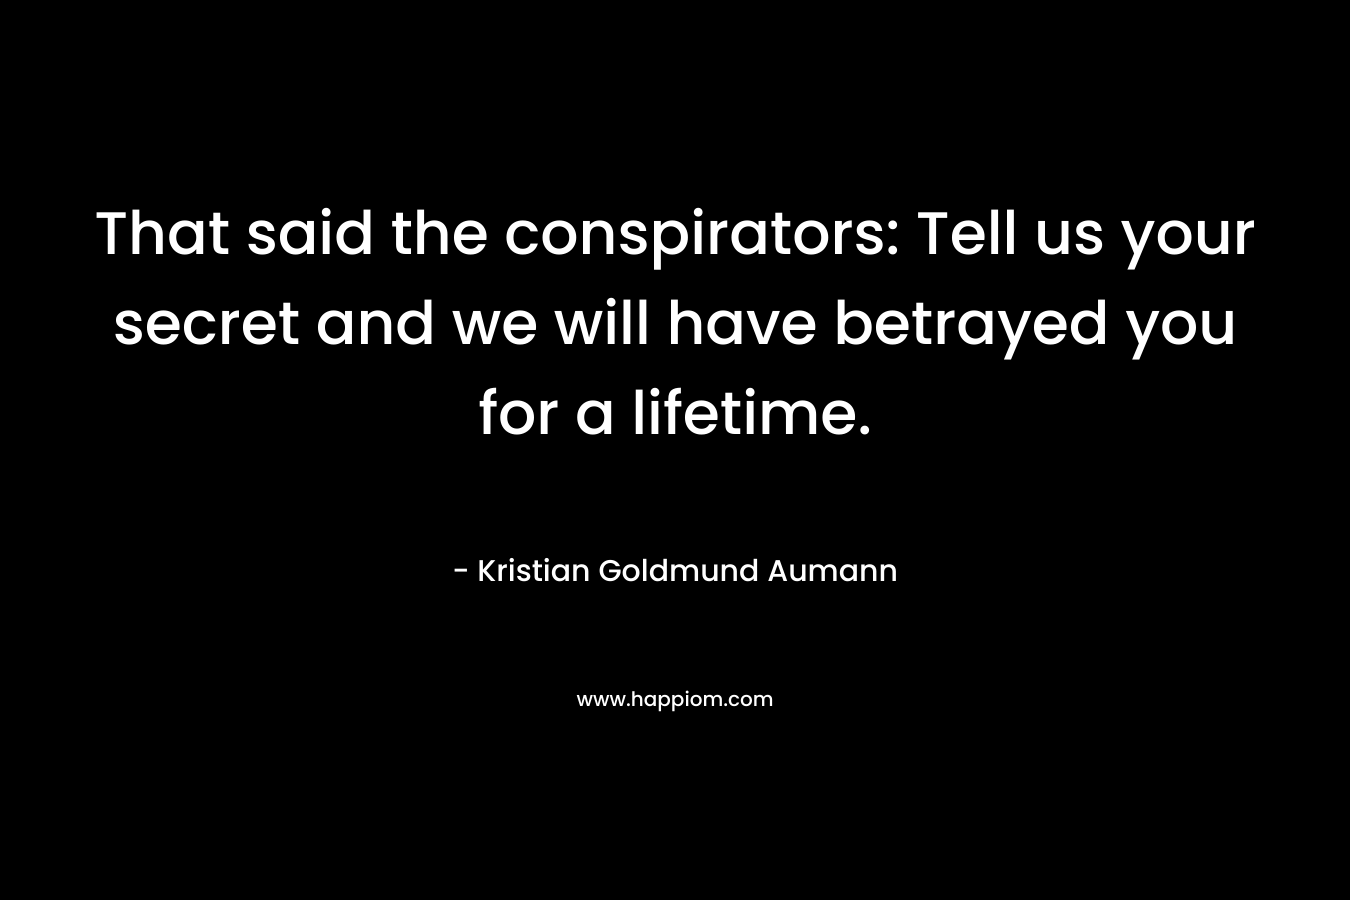 That said the conspirators: Tell us your secret and we will have betrayed you for a lifetime.